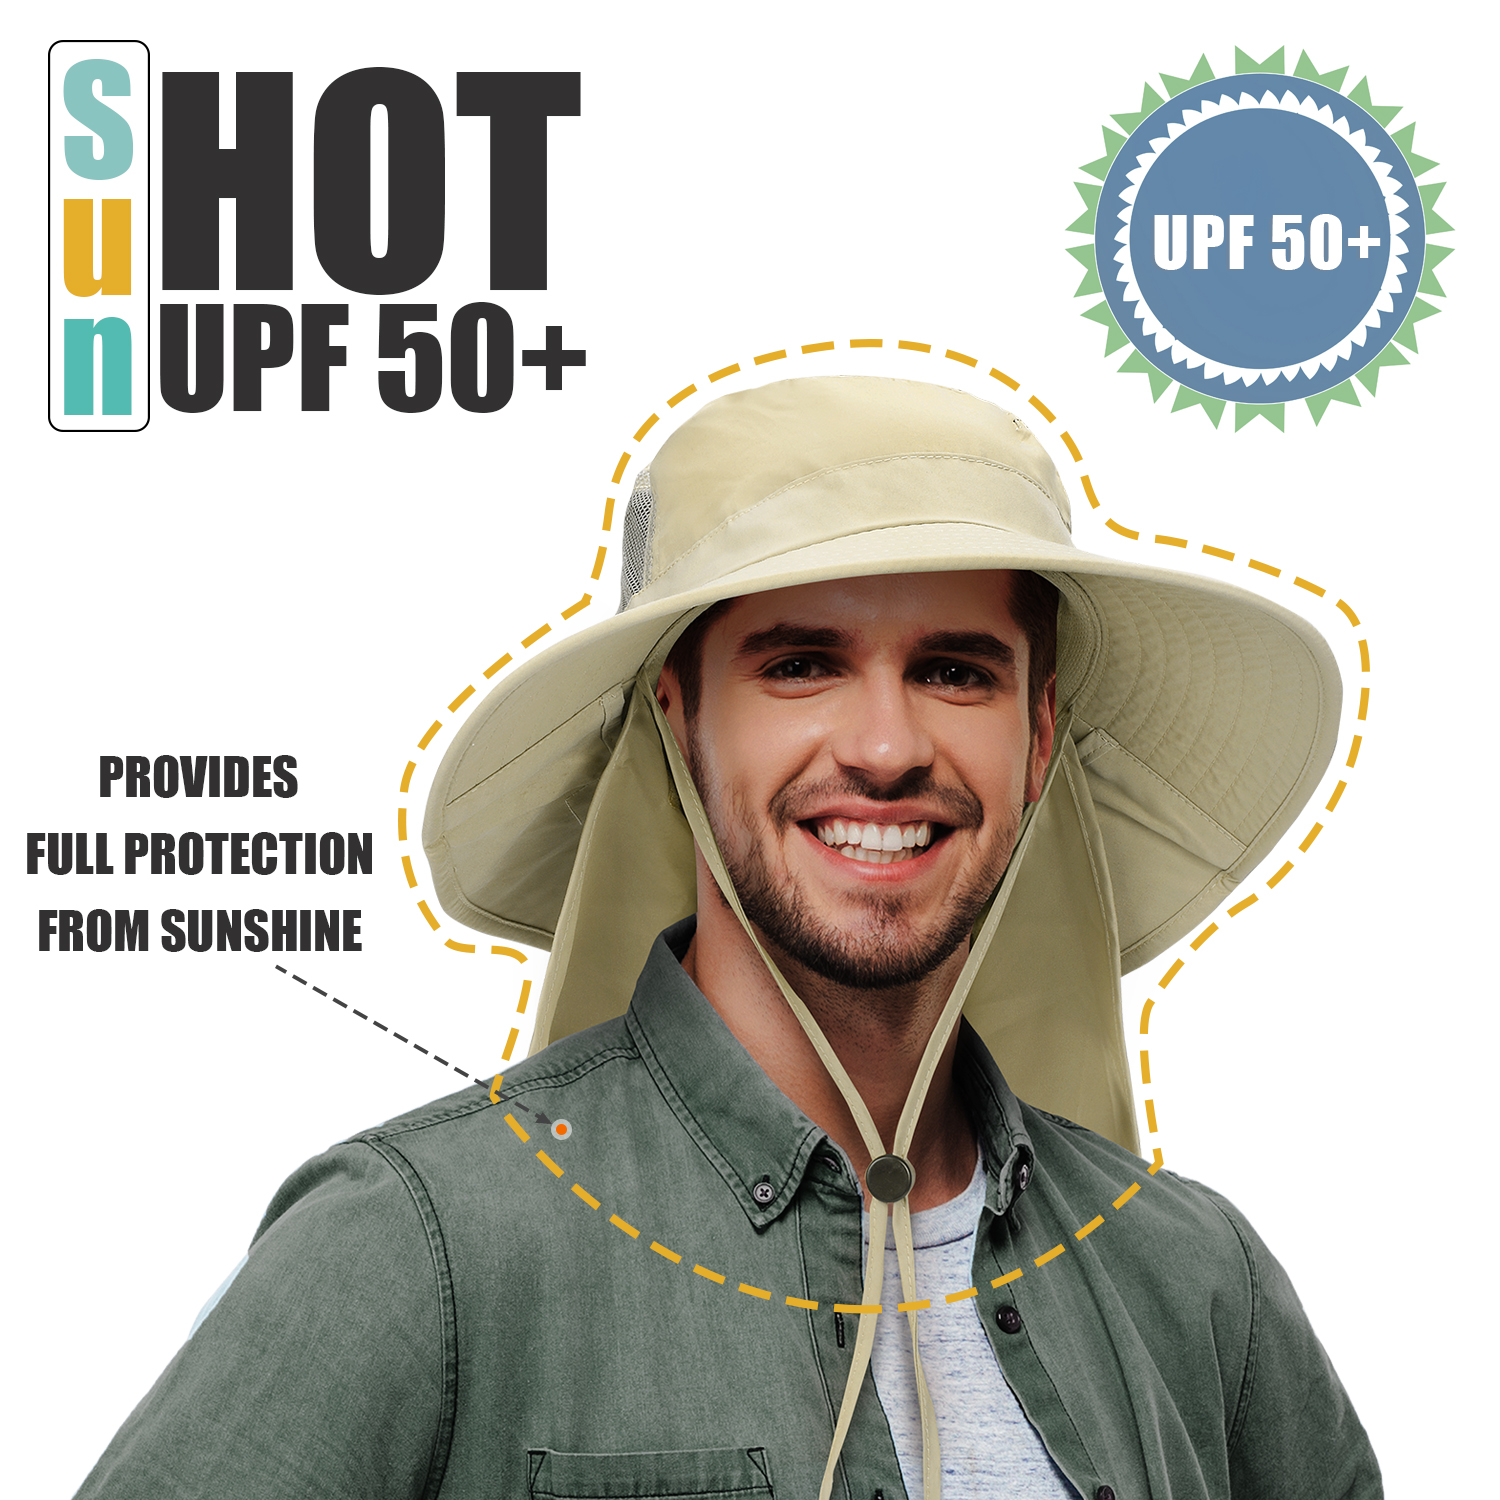 Men's Sun Hat with Neck Flap, Wide Brim Fishing Safari Hiking Hat, UPF 50+ Protection, Adjustable Chin Strap - image 2 of 7